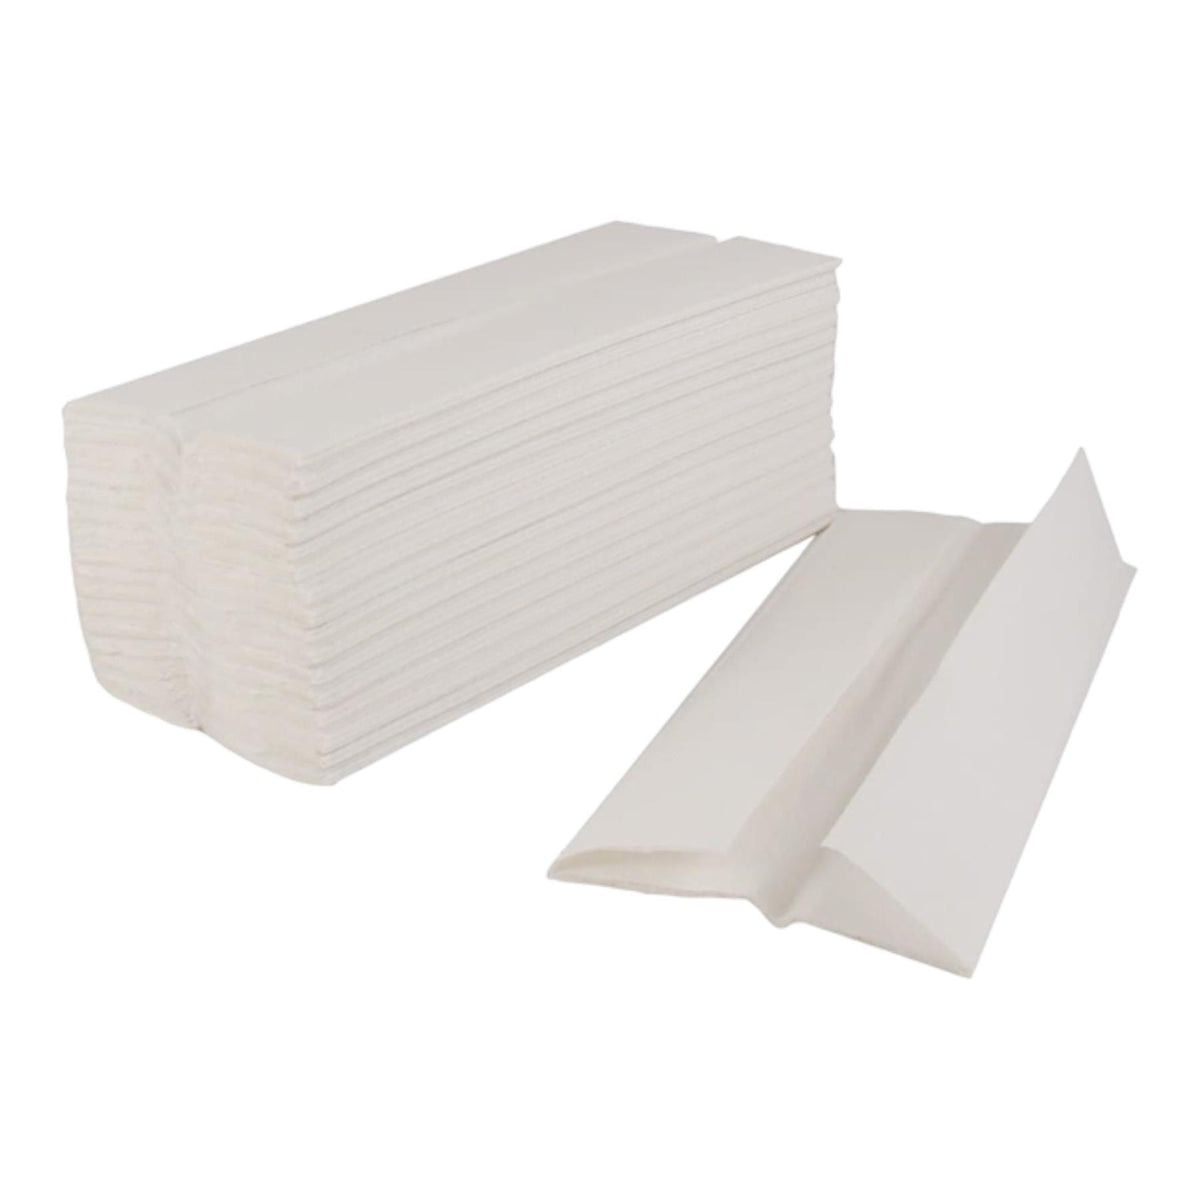 C Fold Towels White Case of 2400